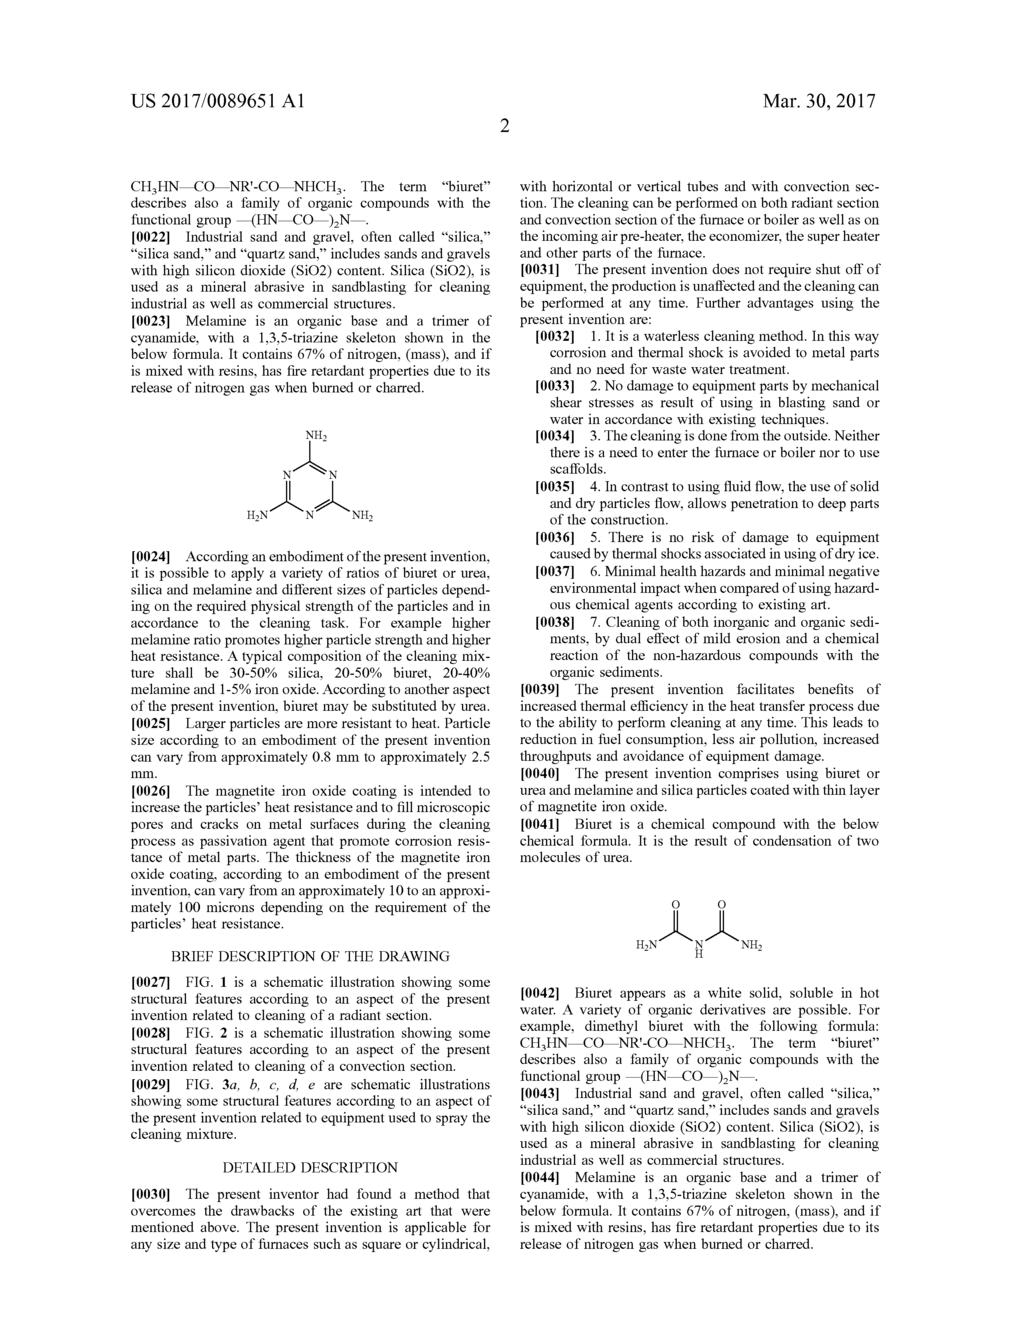 US 2017/089651 A1 Mar. 30, 2017 CHHN C NR'-C. NHCH. The term biuret describes also a family of organic compounds with the functional group (HN C )N.